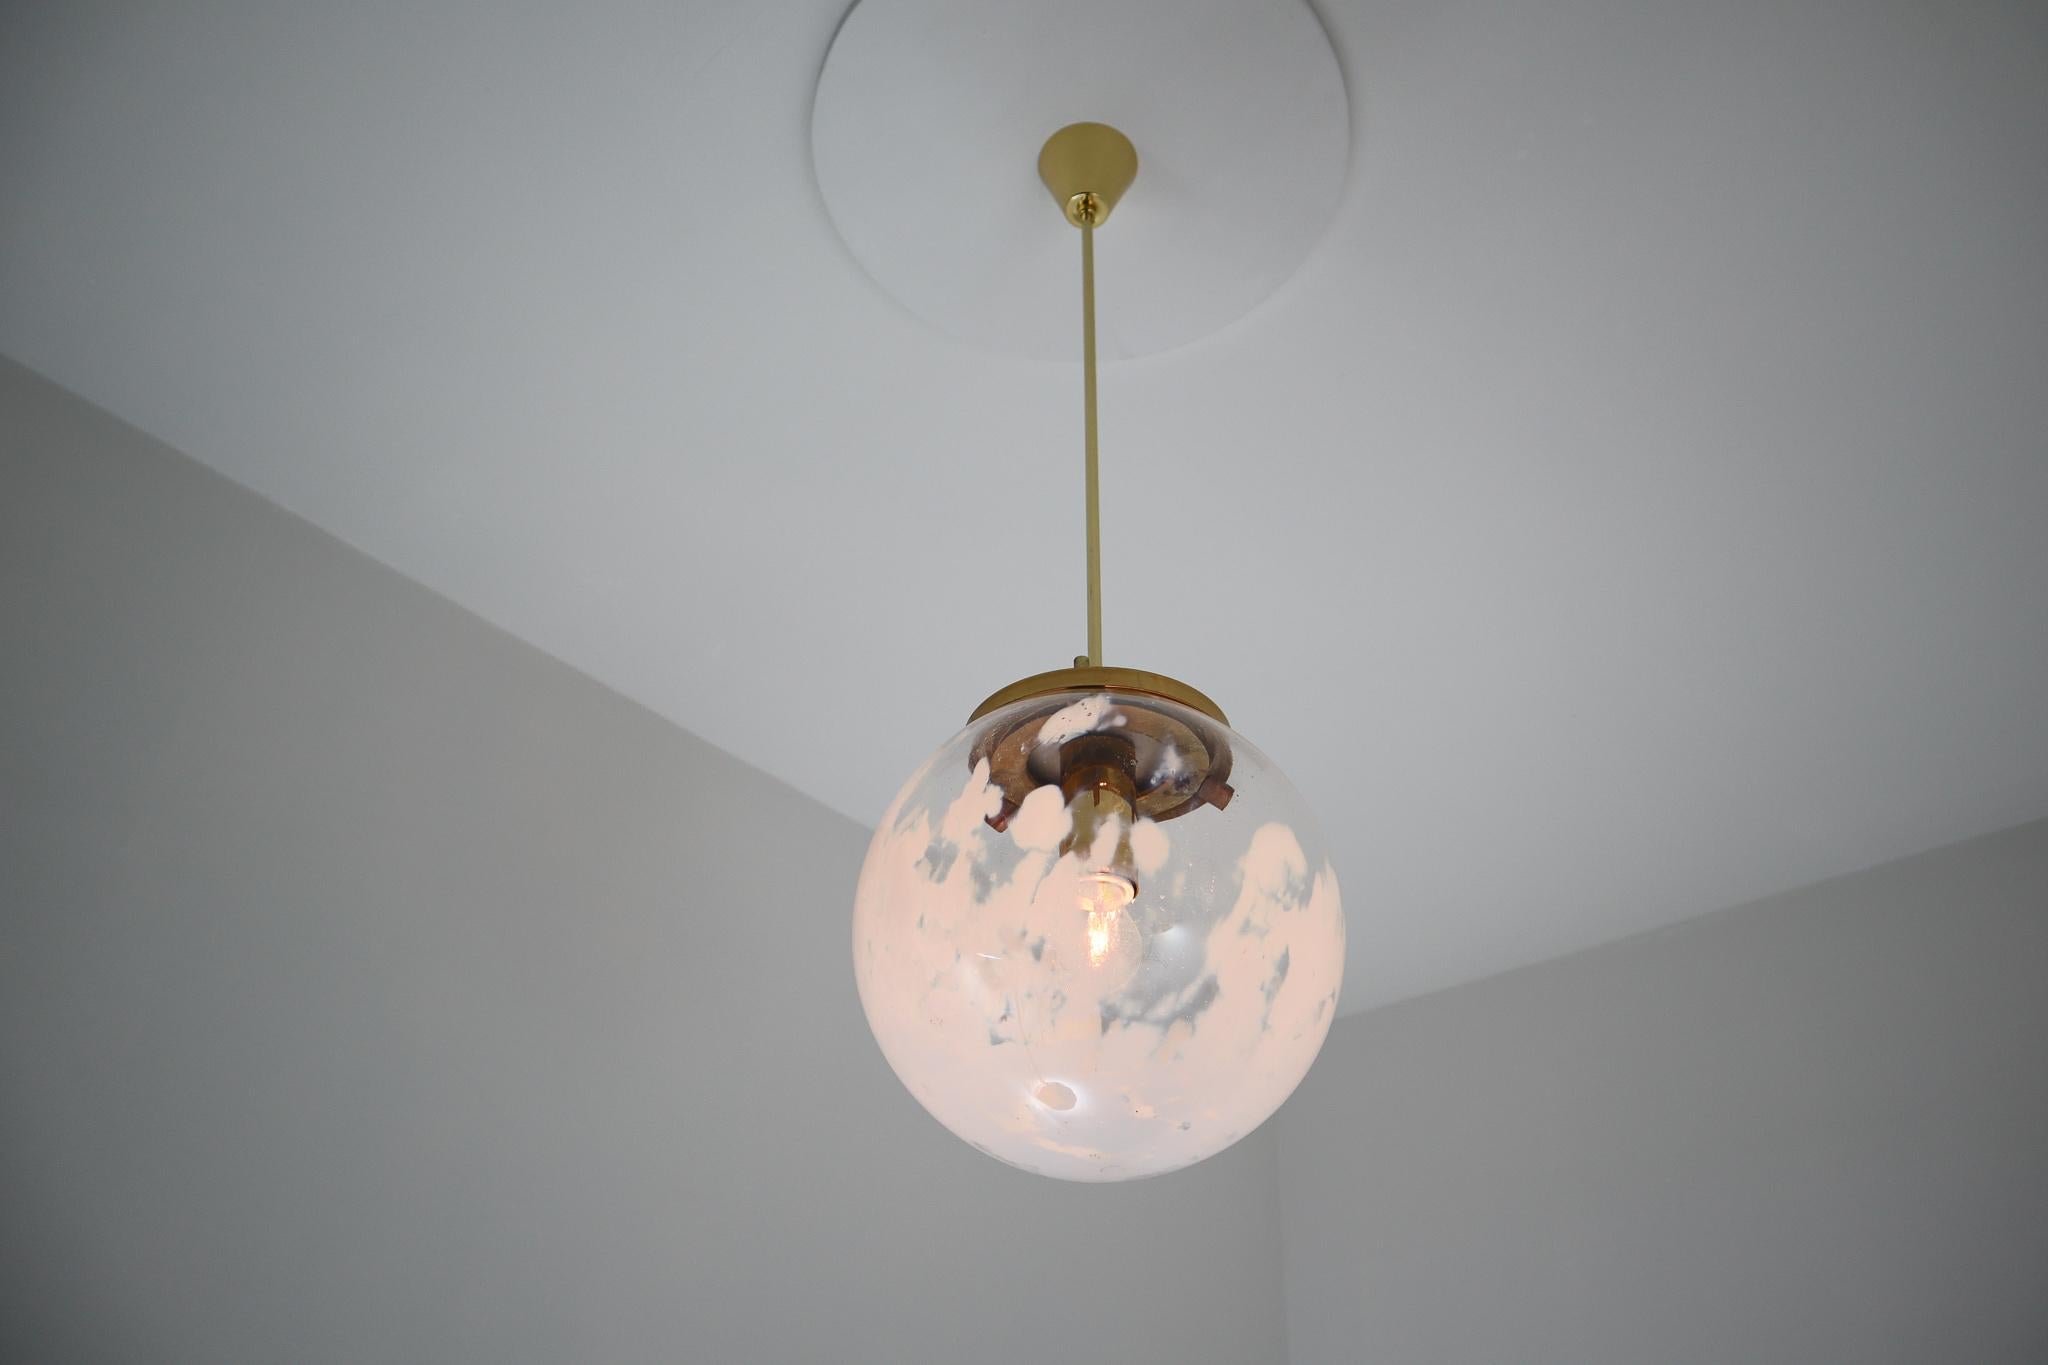 20th Century Midcentury Pendants in Brass and Art-Glass with White Streaks, Austria, 1960s